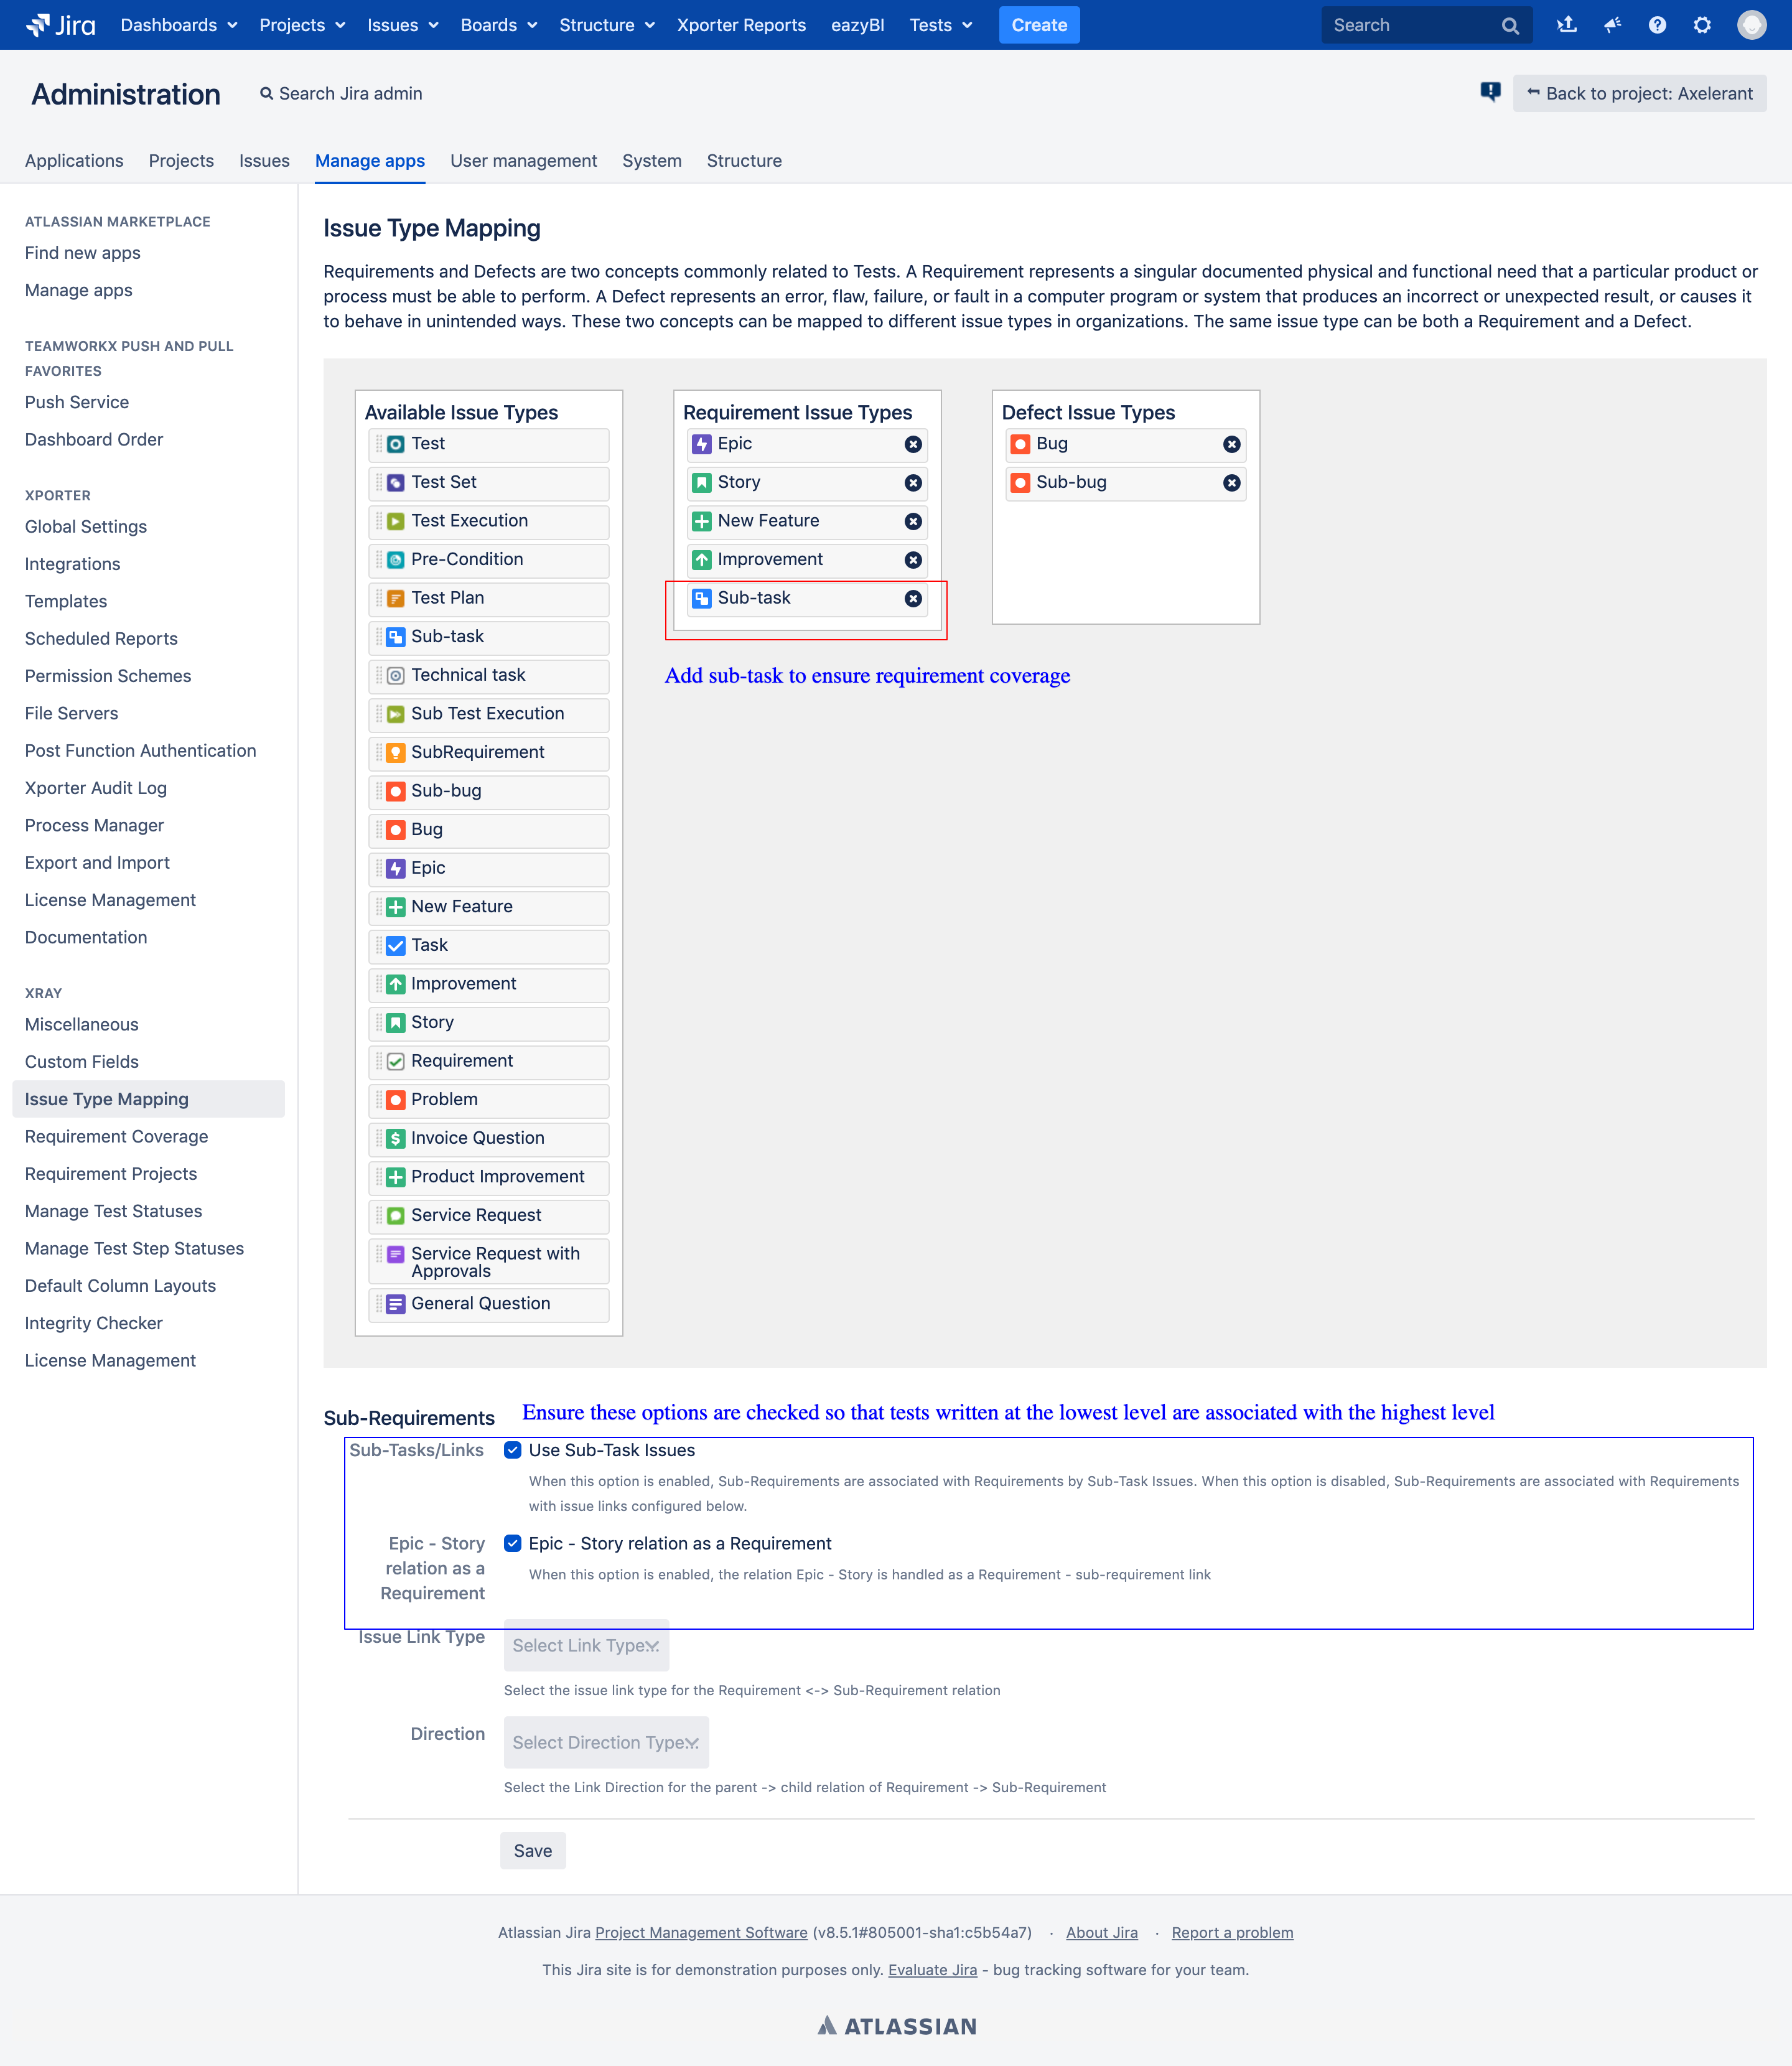 Jira administration board for Issue type mapping